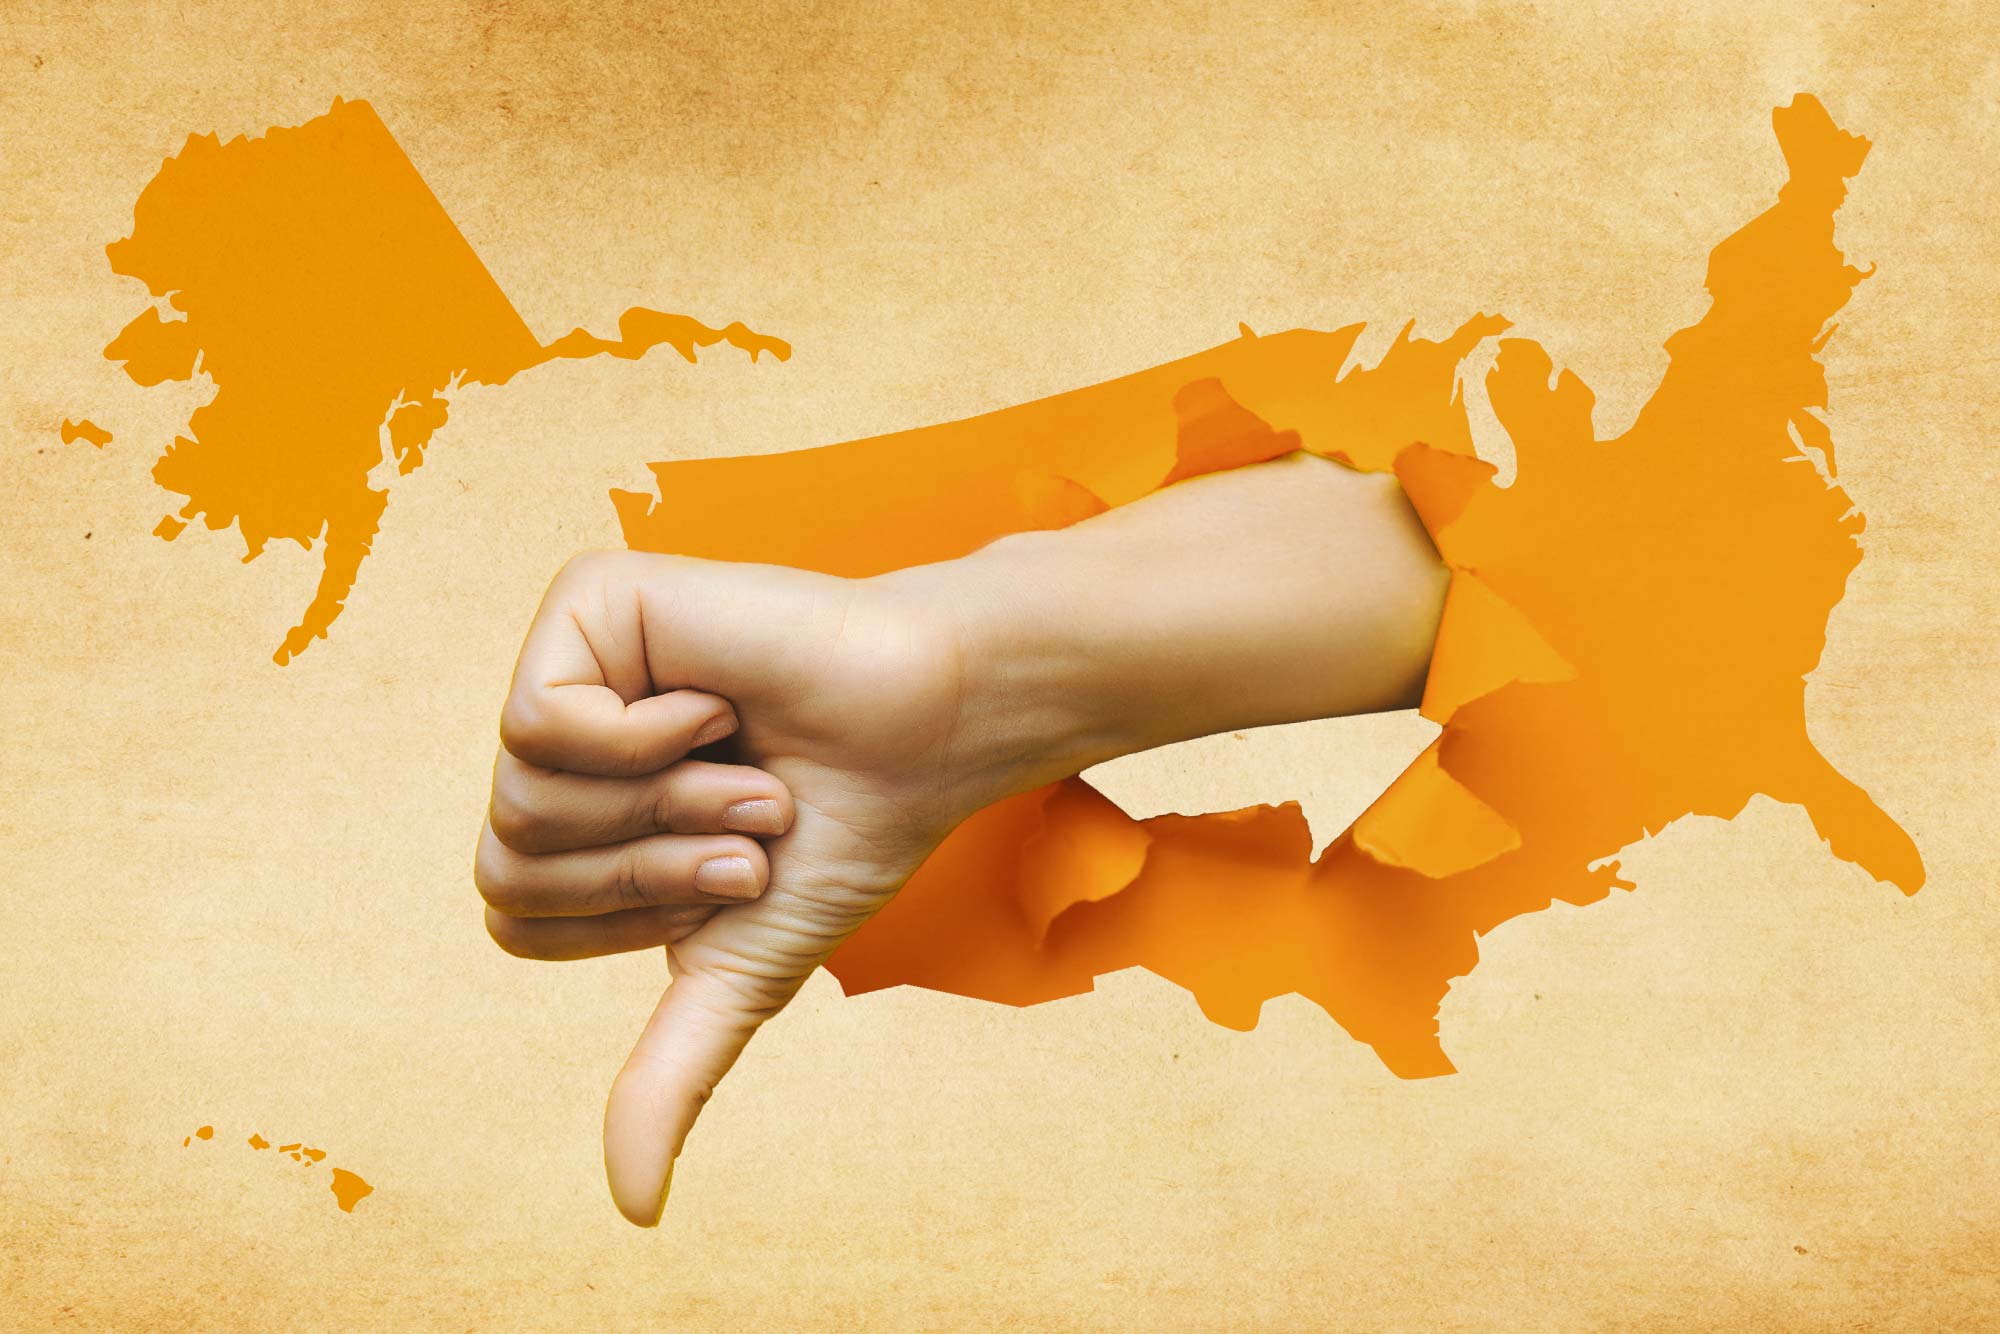 Illustration of a hand coming out of a map of the United States giving a thumbs down